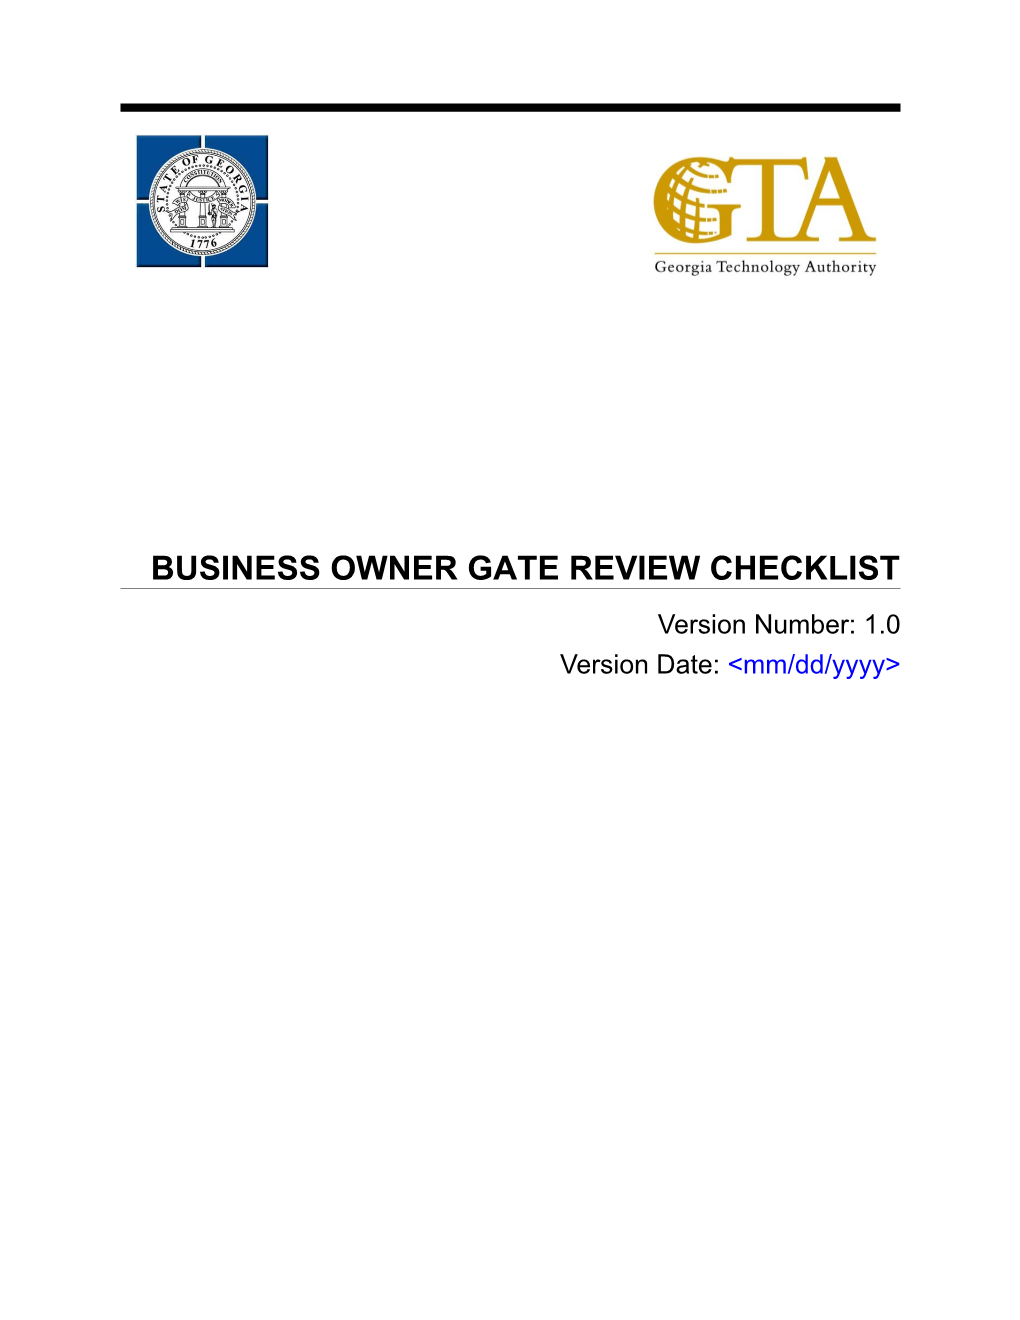 Business Owner Gate Review Checklist